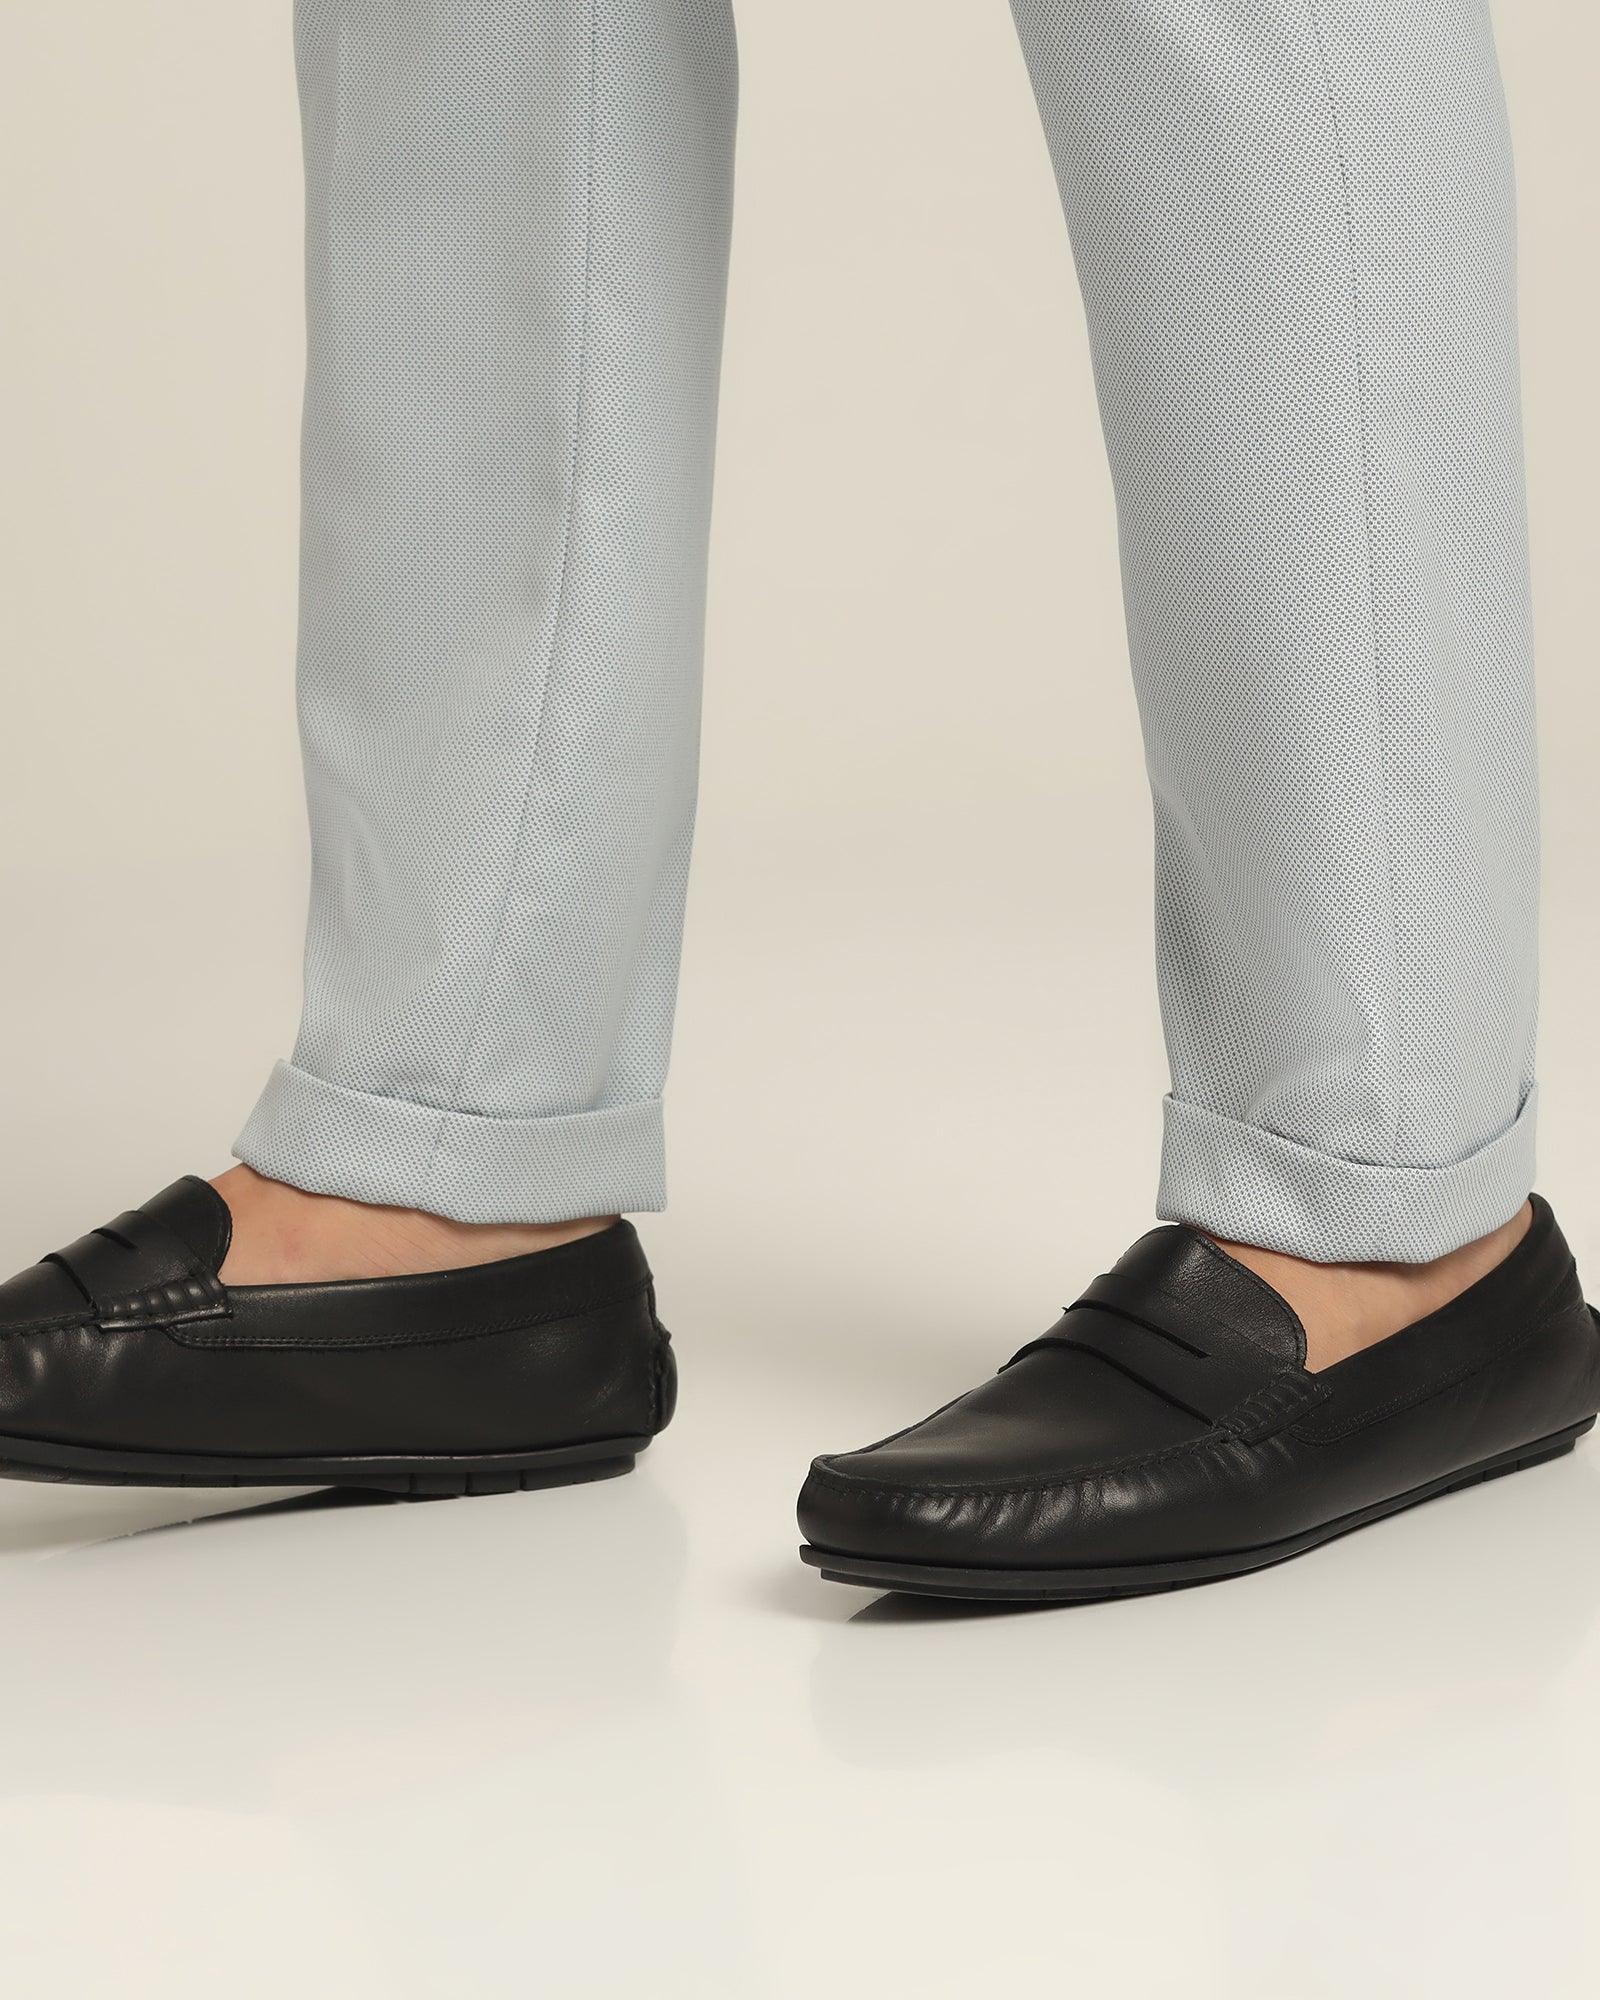 GQ Office Style: How to Conquer Your Complex Pant-Shoe Relationship | GQ